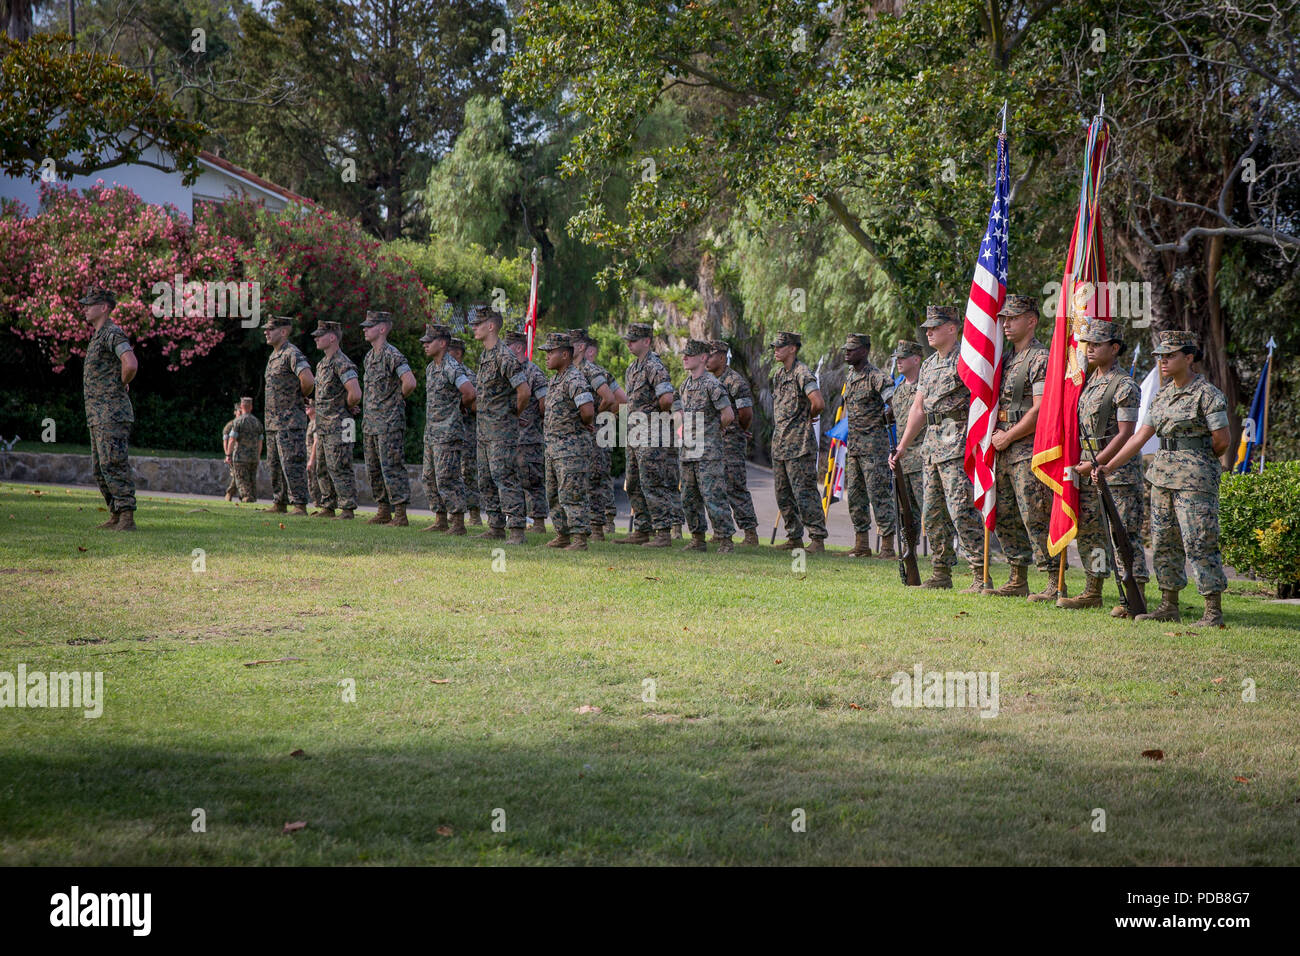 U.S. Marines with Marine Corps Air Station Camp Pendleton (MCAS) stand at parade rest during the MCAS Camp Pendleton change of command ceremony at the Santa Margarita Ranch House, Marine Corps Base Camp Pendleton, California, August 2, 2018. The ceremony formally marked the transfer of authority and responsibility of MCAS Camp Pendleton to Col. Richard T. Anderson, incoming commanding officer, MCAS Camp Pendleton. (U.S. Marine Corps photo by Lance Cpl. Betzabeth Y. Galvan) Stock Photo